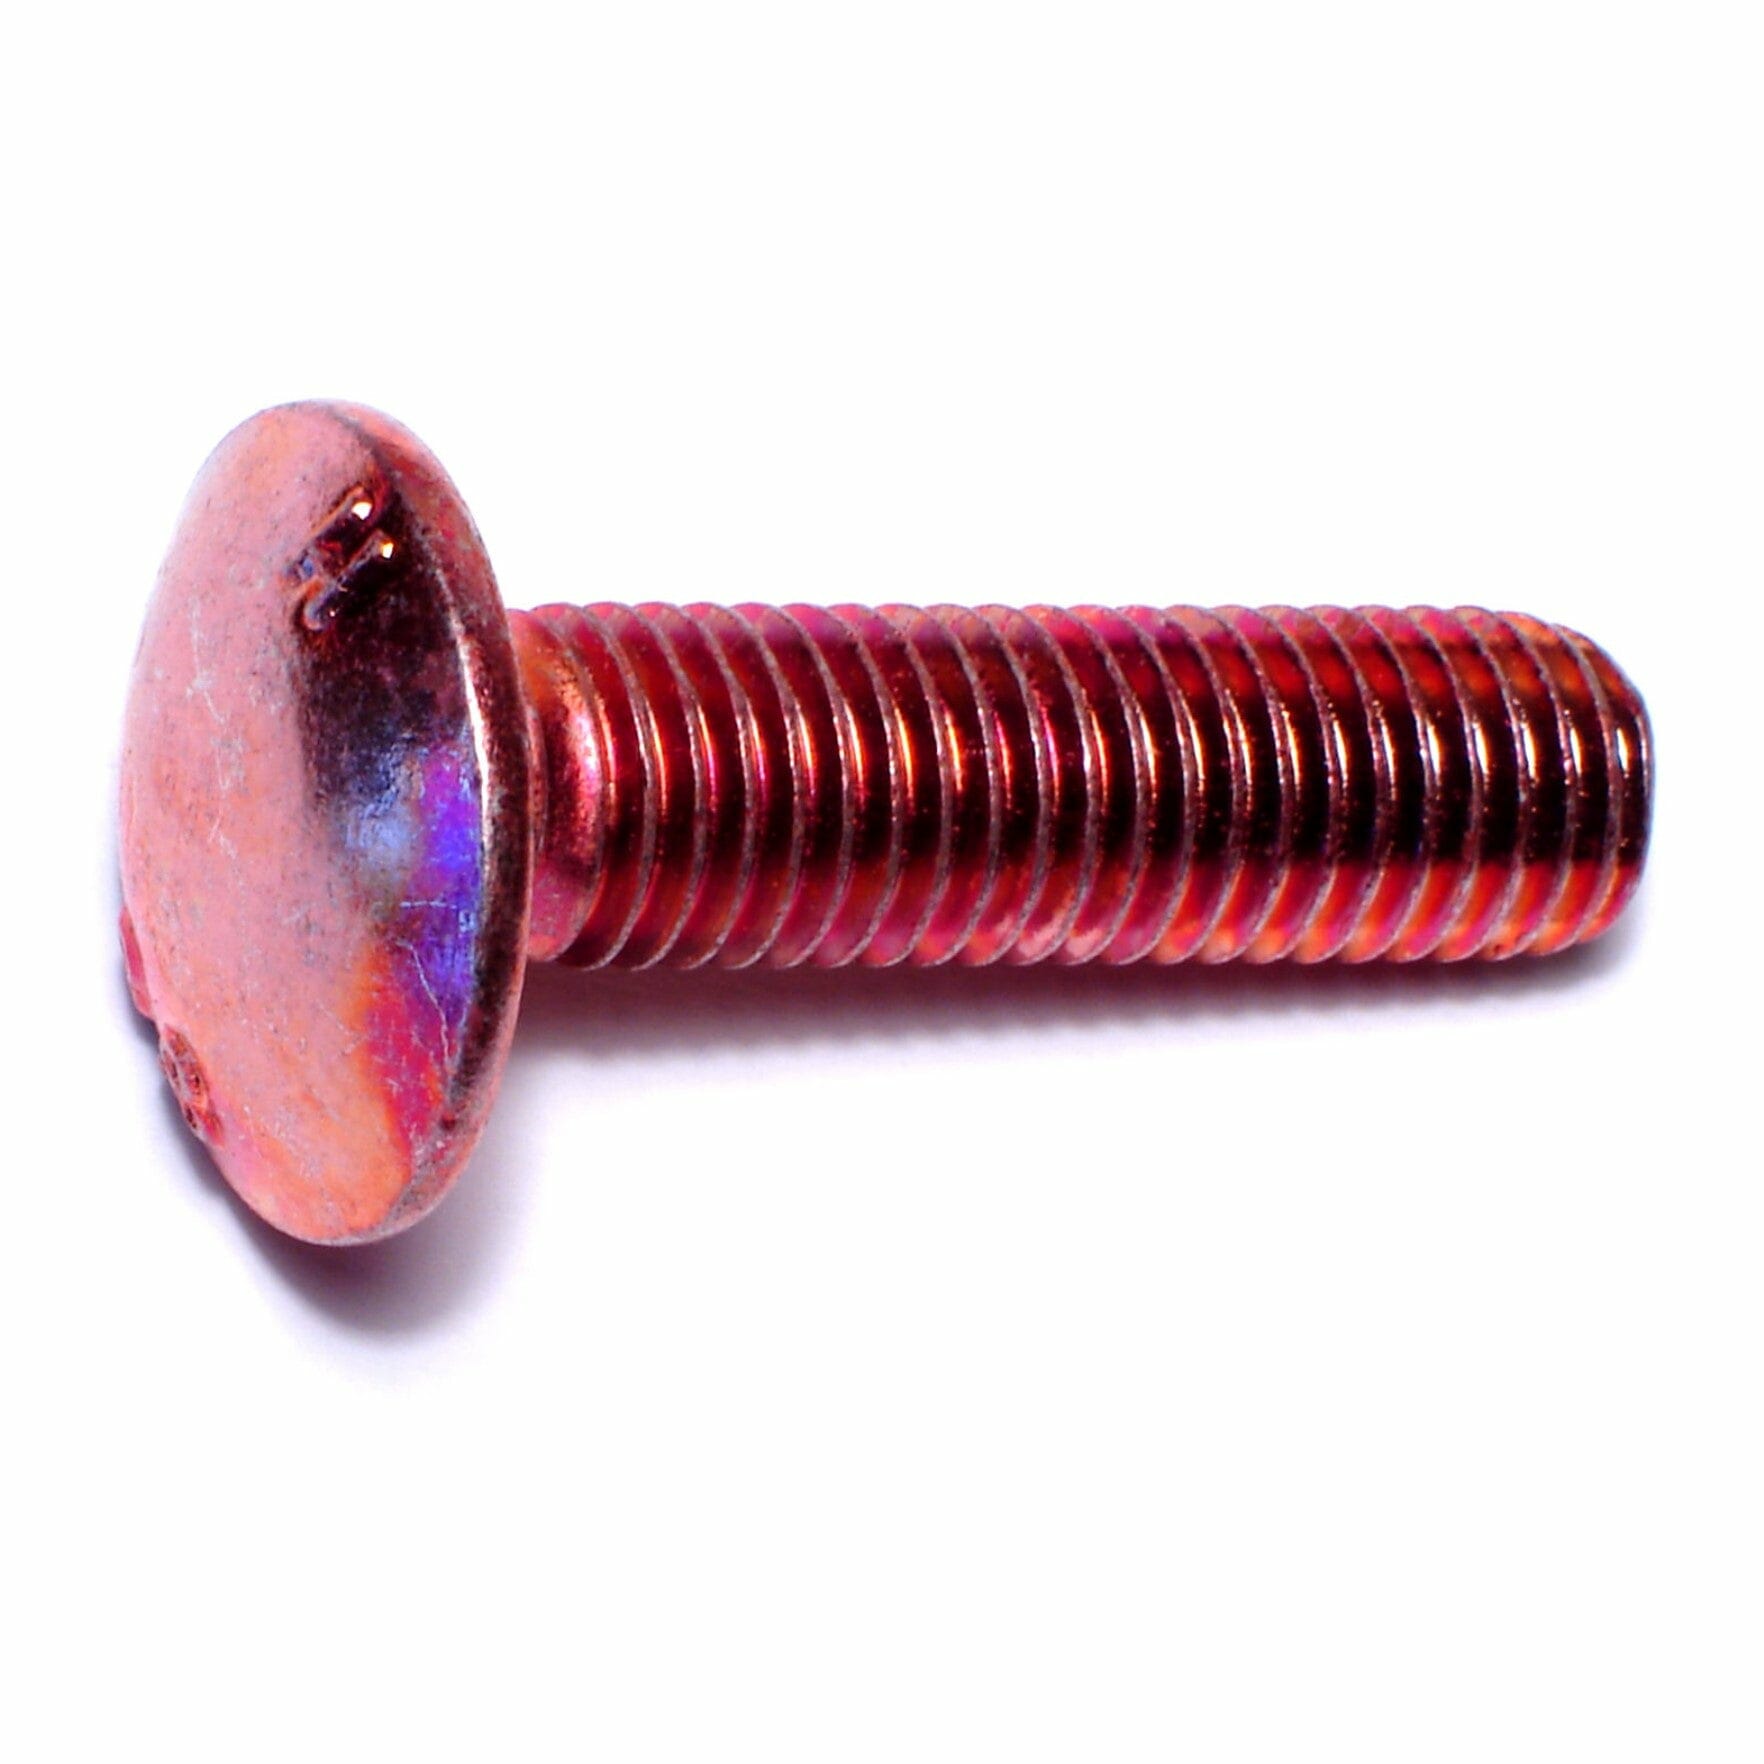 Fasteners, Bolts,12mm-1.75mm x 45mm, Carriage Bolts